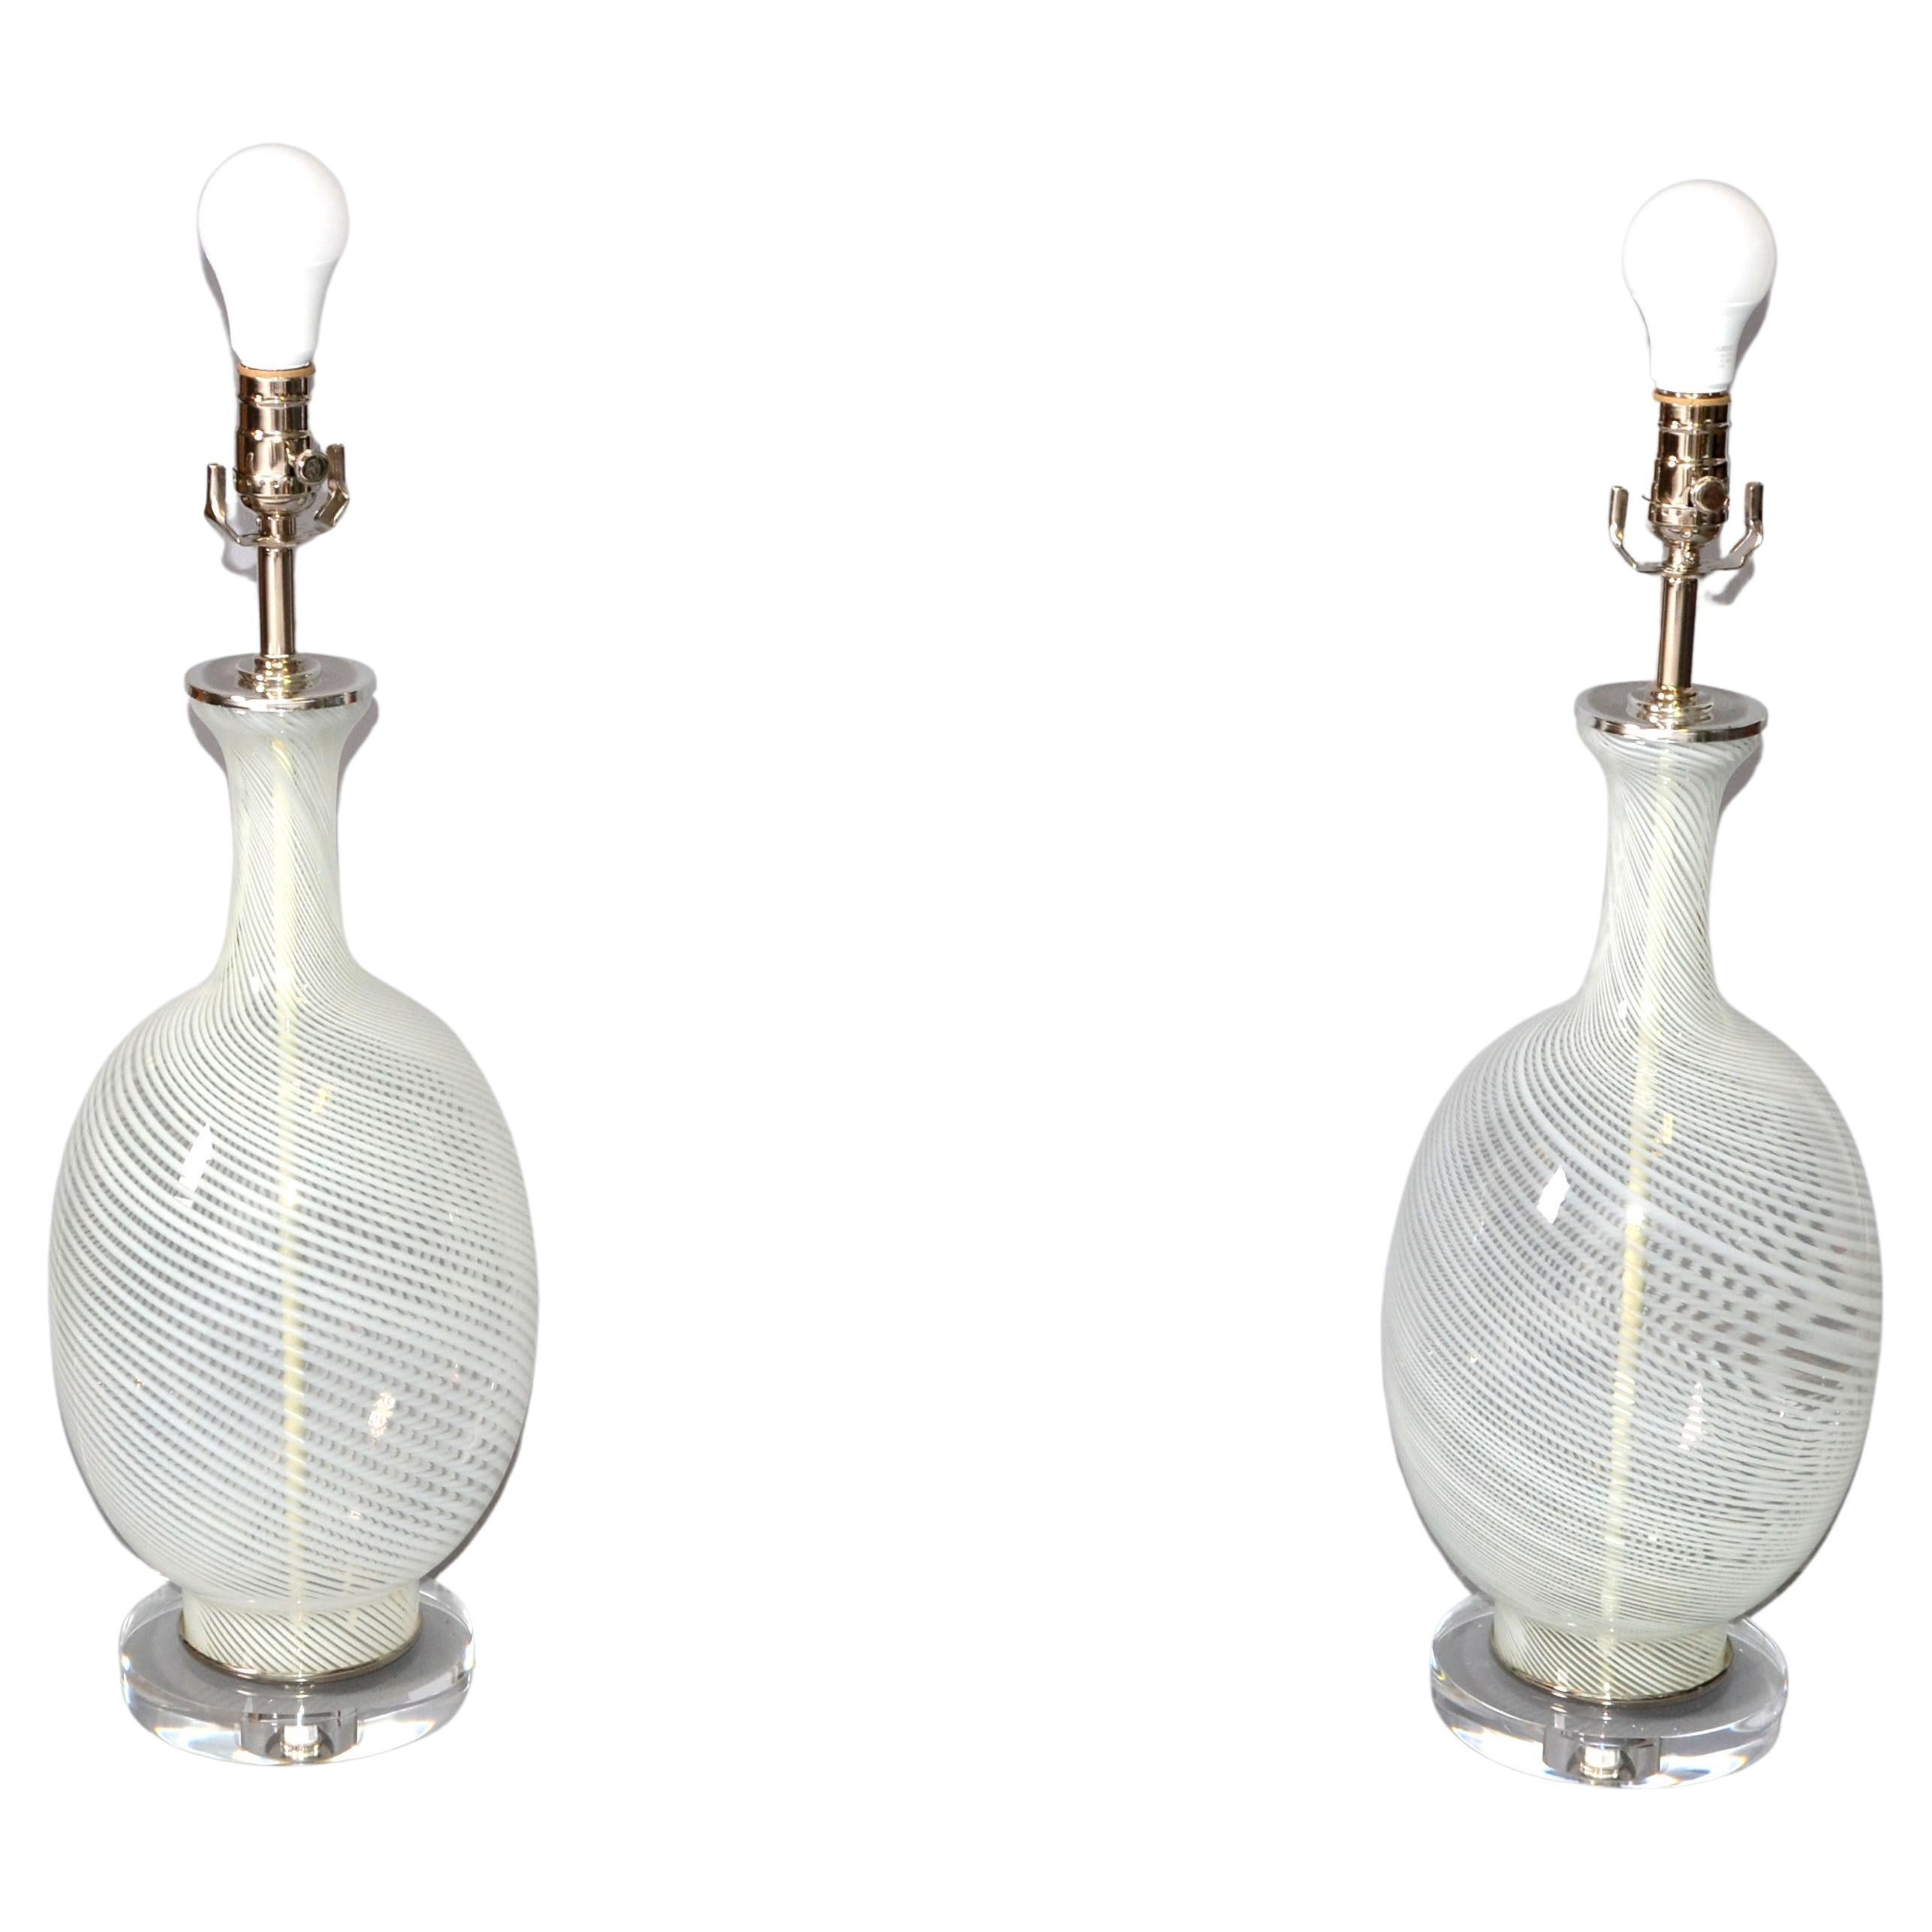 Pair of Mid-Century Modern hand-blown art glass table lamp by Blenko.
The swirled transparent glass body is mounted on an acrylic base and has a nickel top with neck.
In perfect working condition and uses a regular light bulb. We use LED lights.